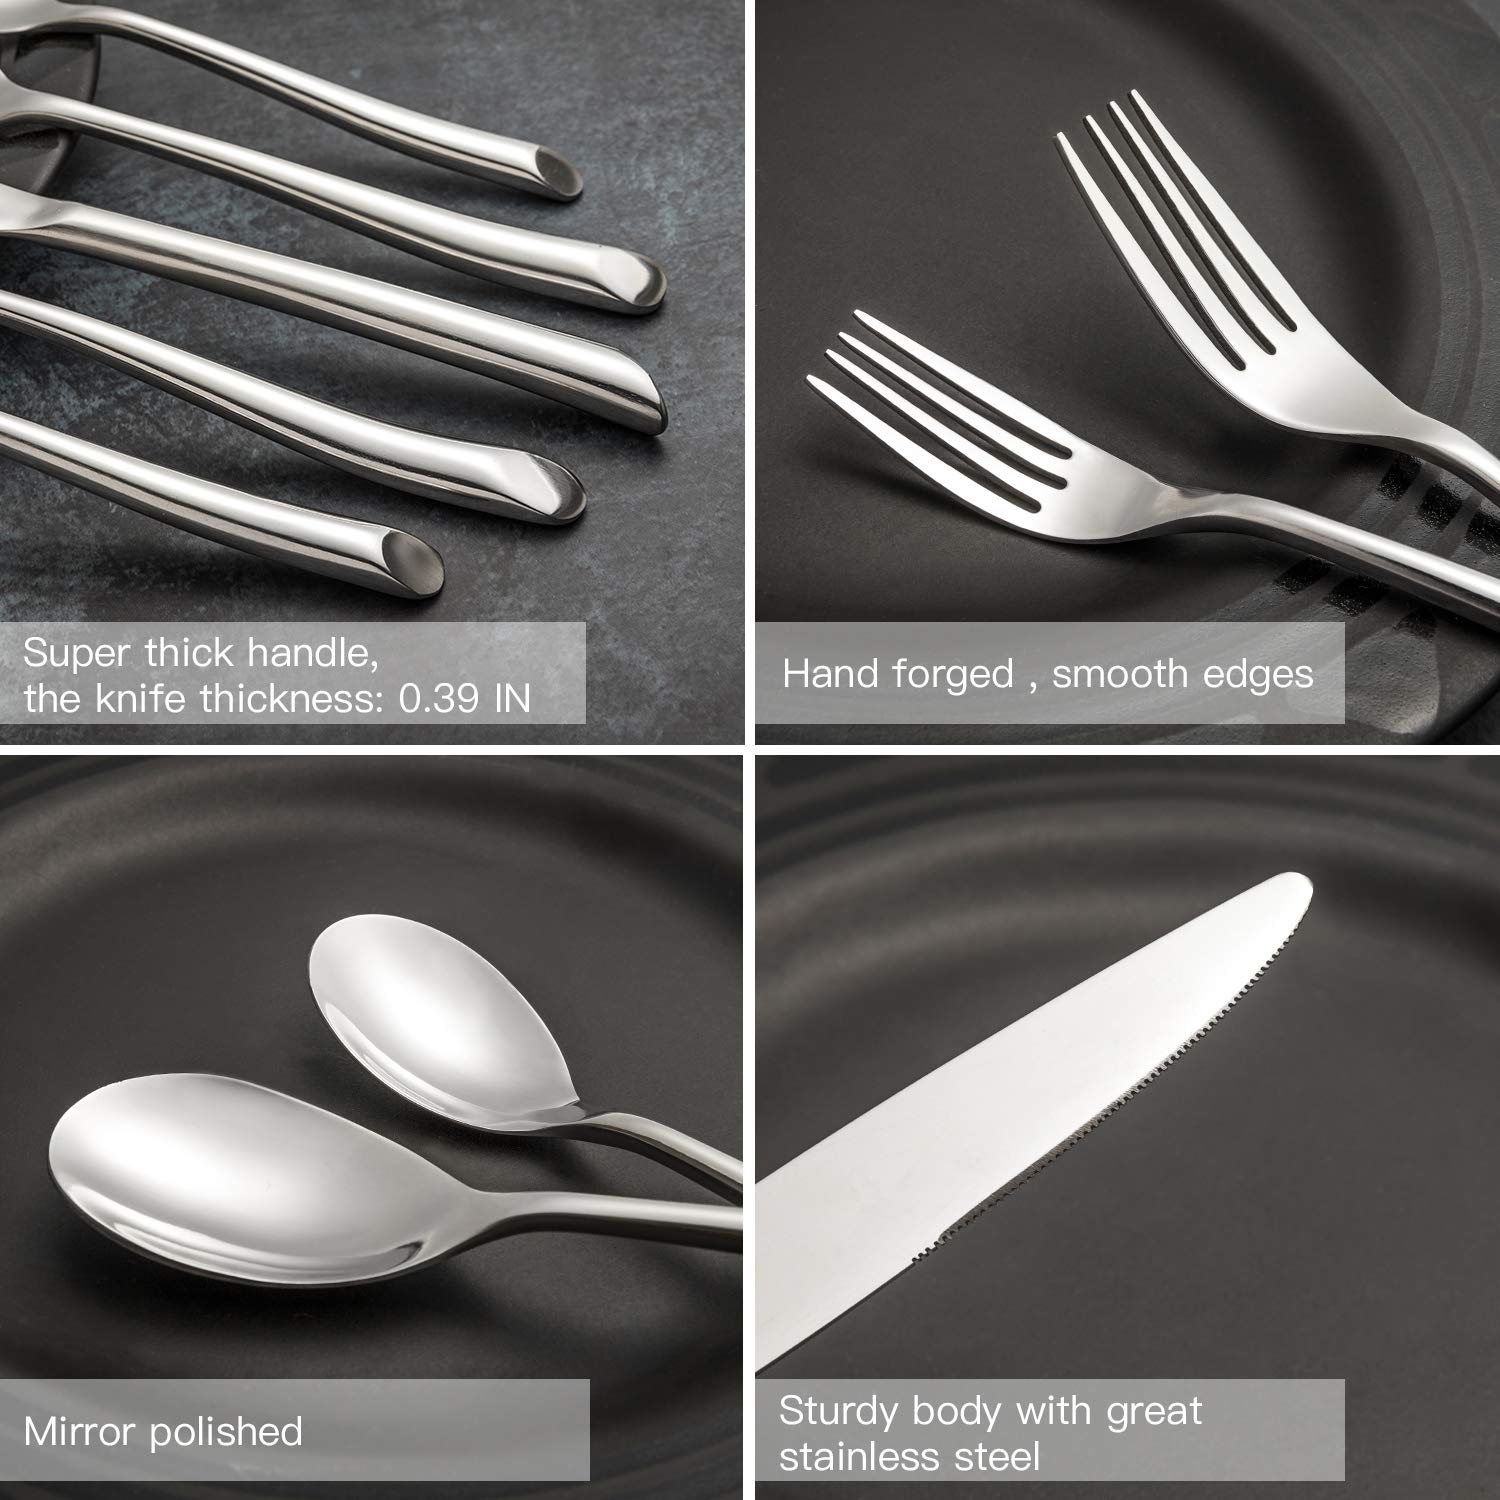 Kelenfer Silverware Stainless Steel Flatware set 20 Piece Cutlery with Wave Handle Home Hotel Restaurant Use Service for 4